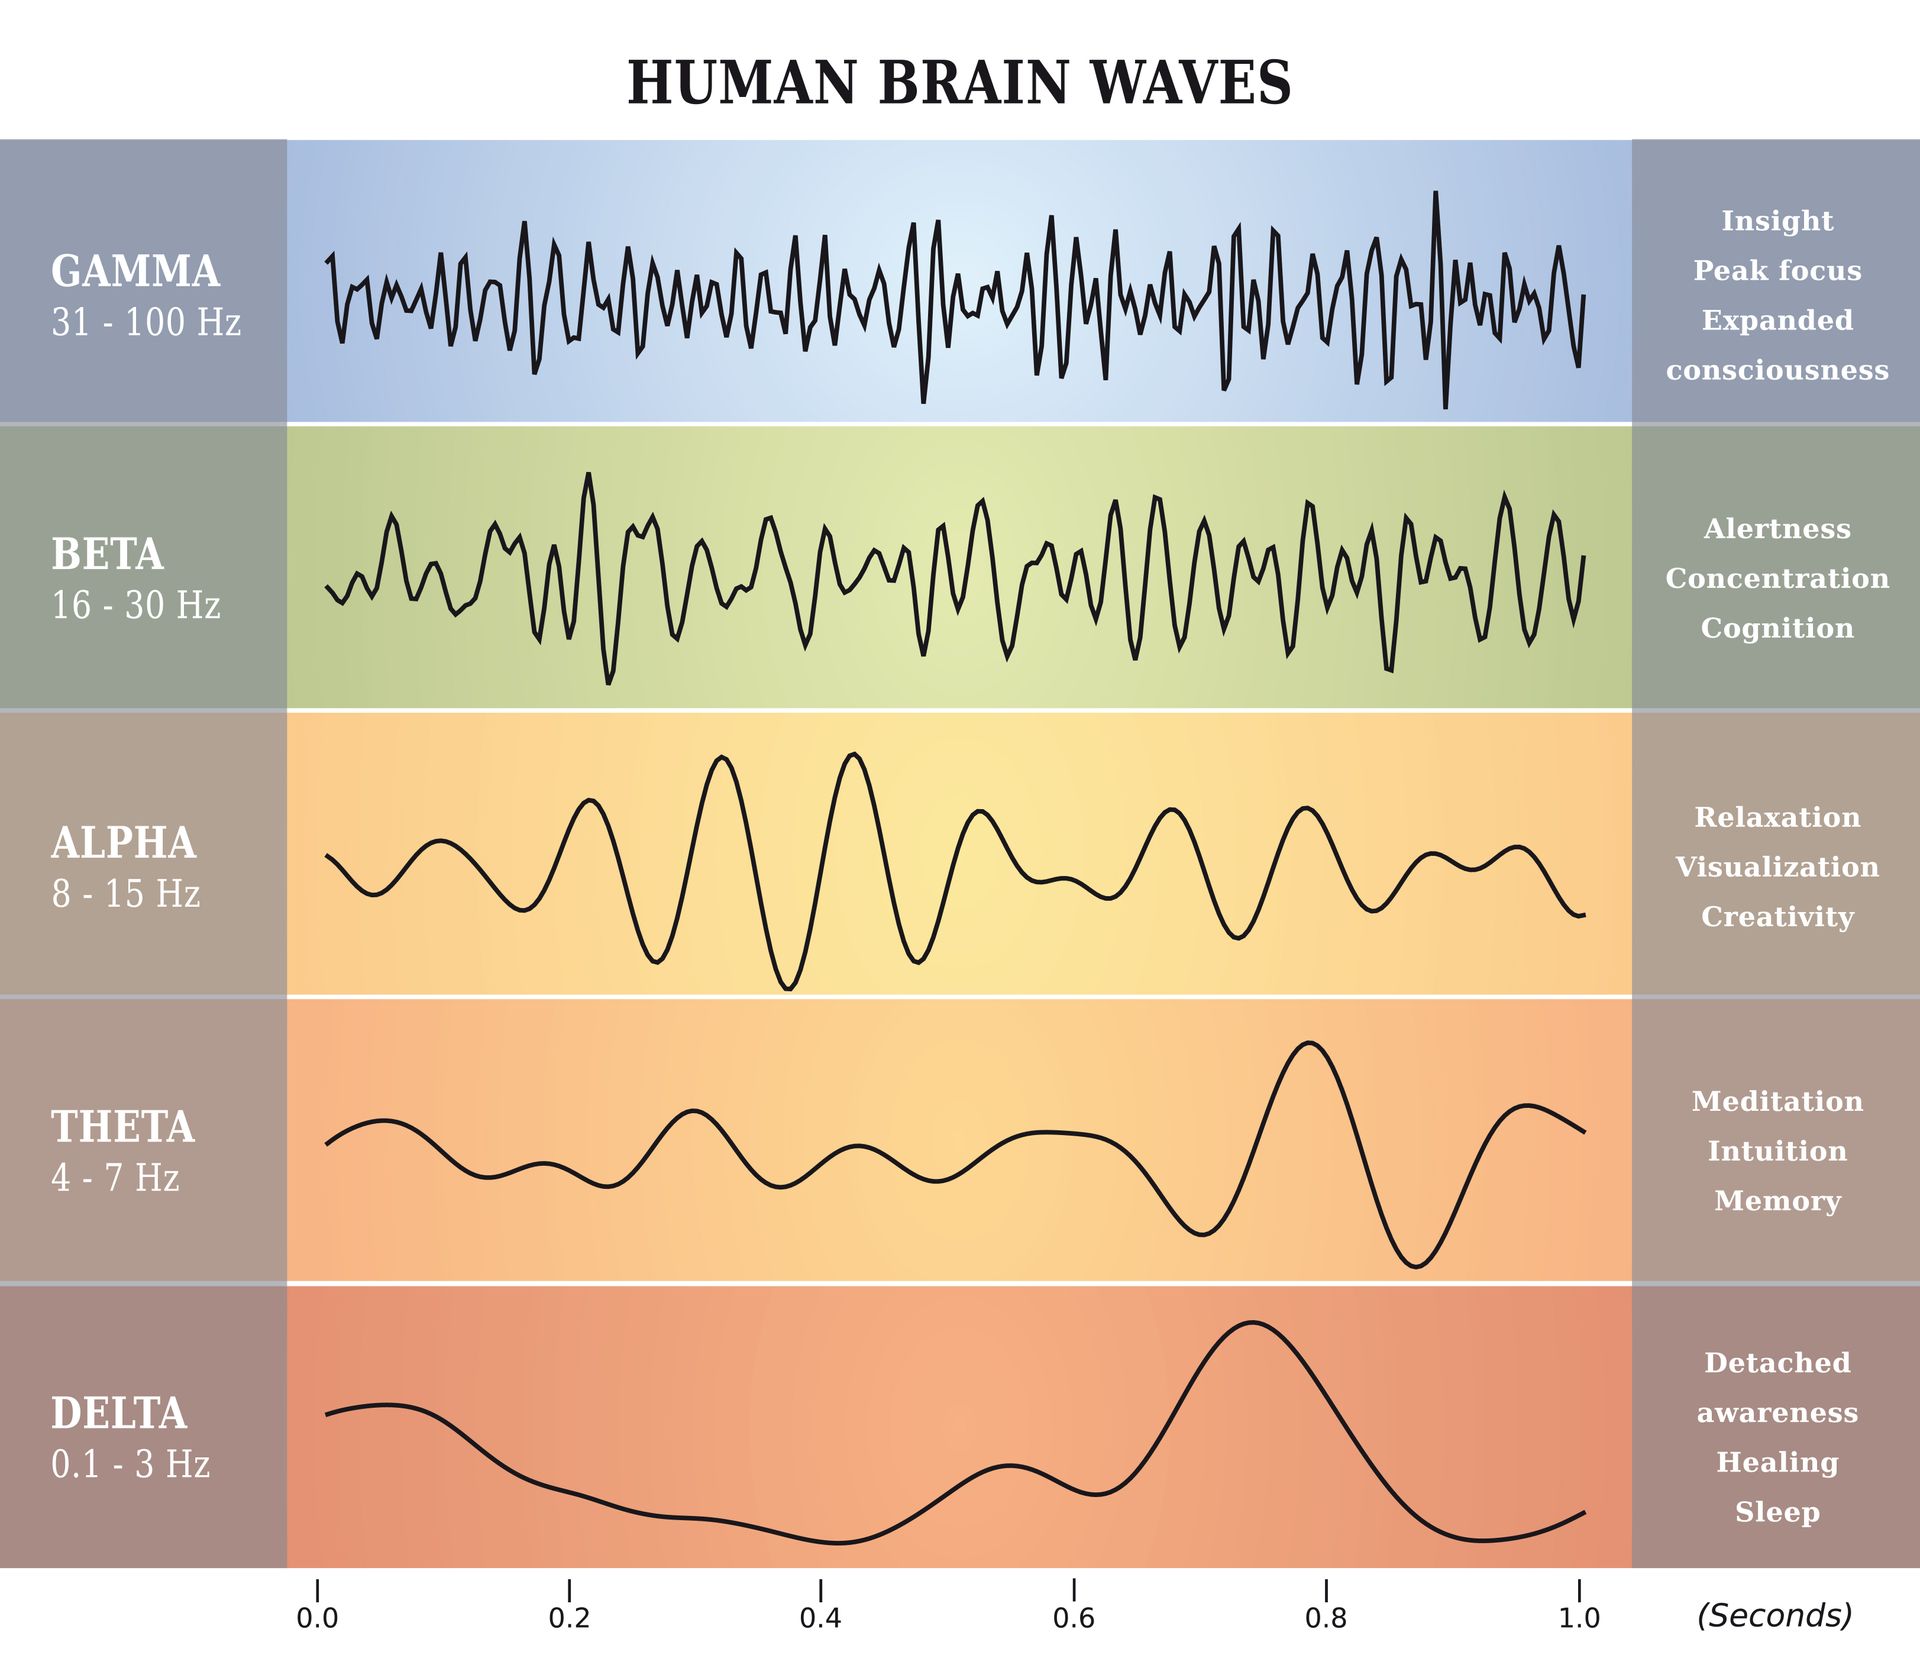 A graphic showing the different kinds of human brain waves.